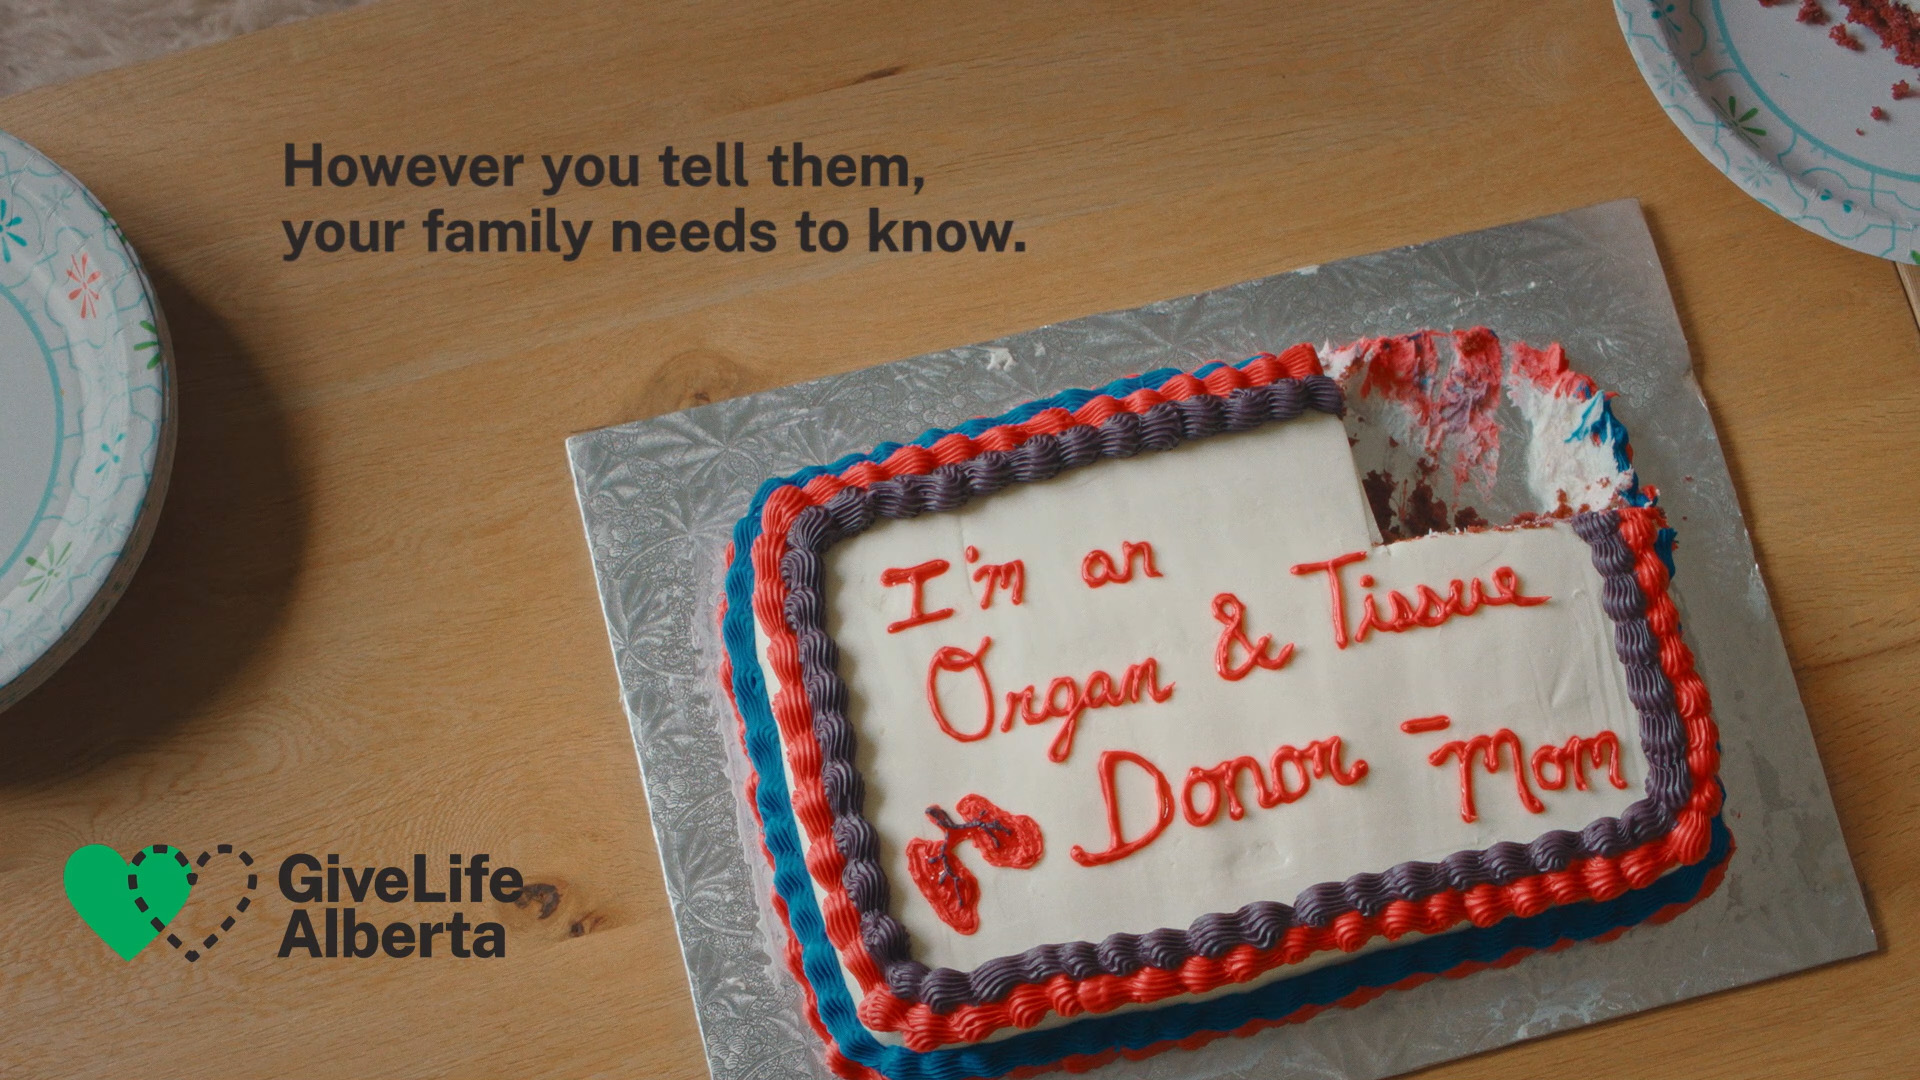 photo of a cake with the words I'm an organ and tissue donor - mom